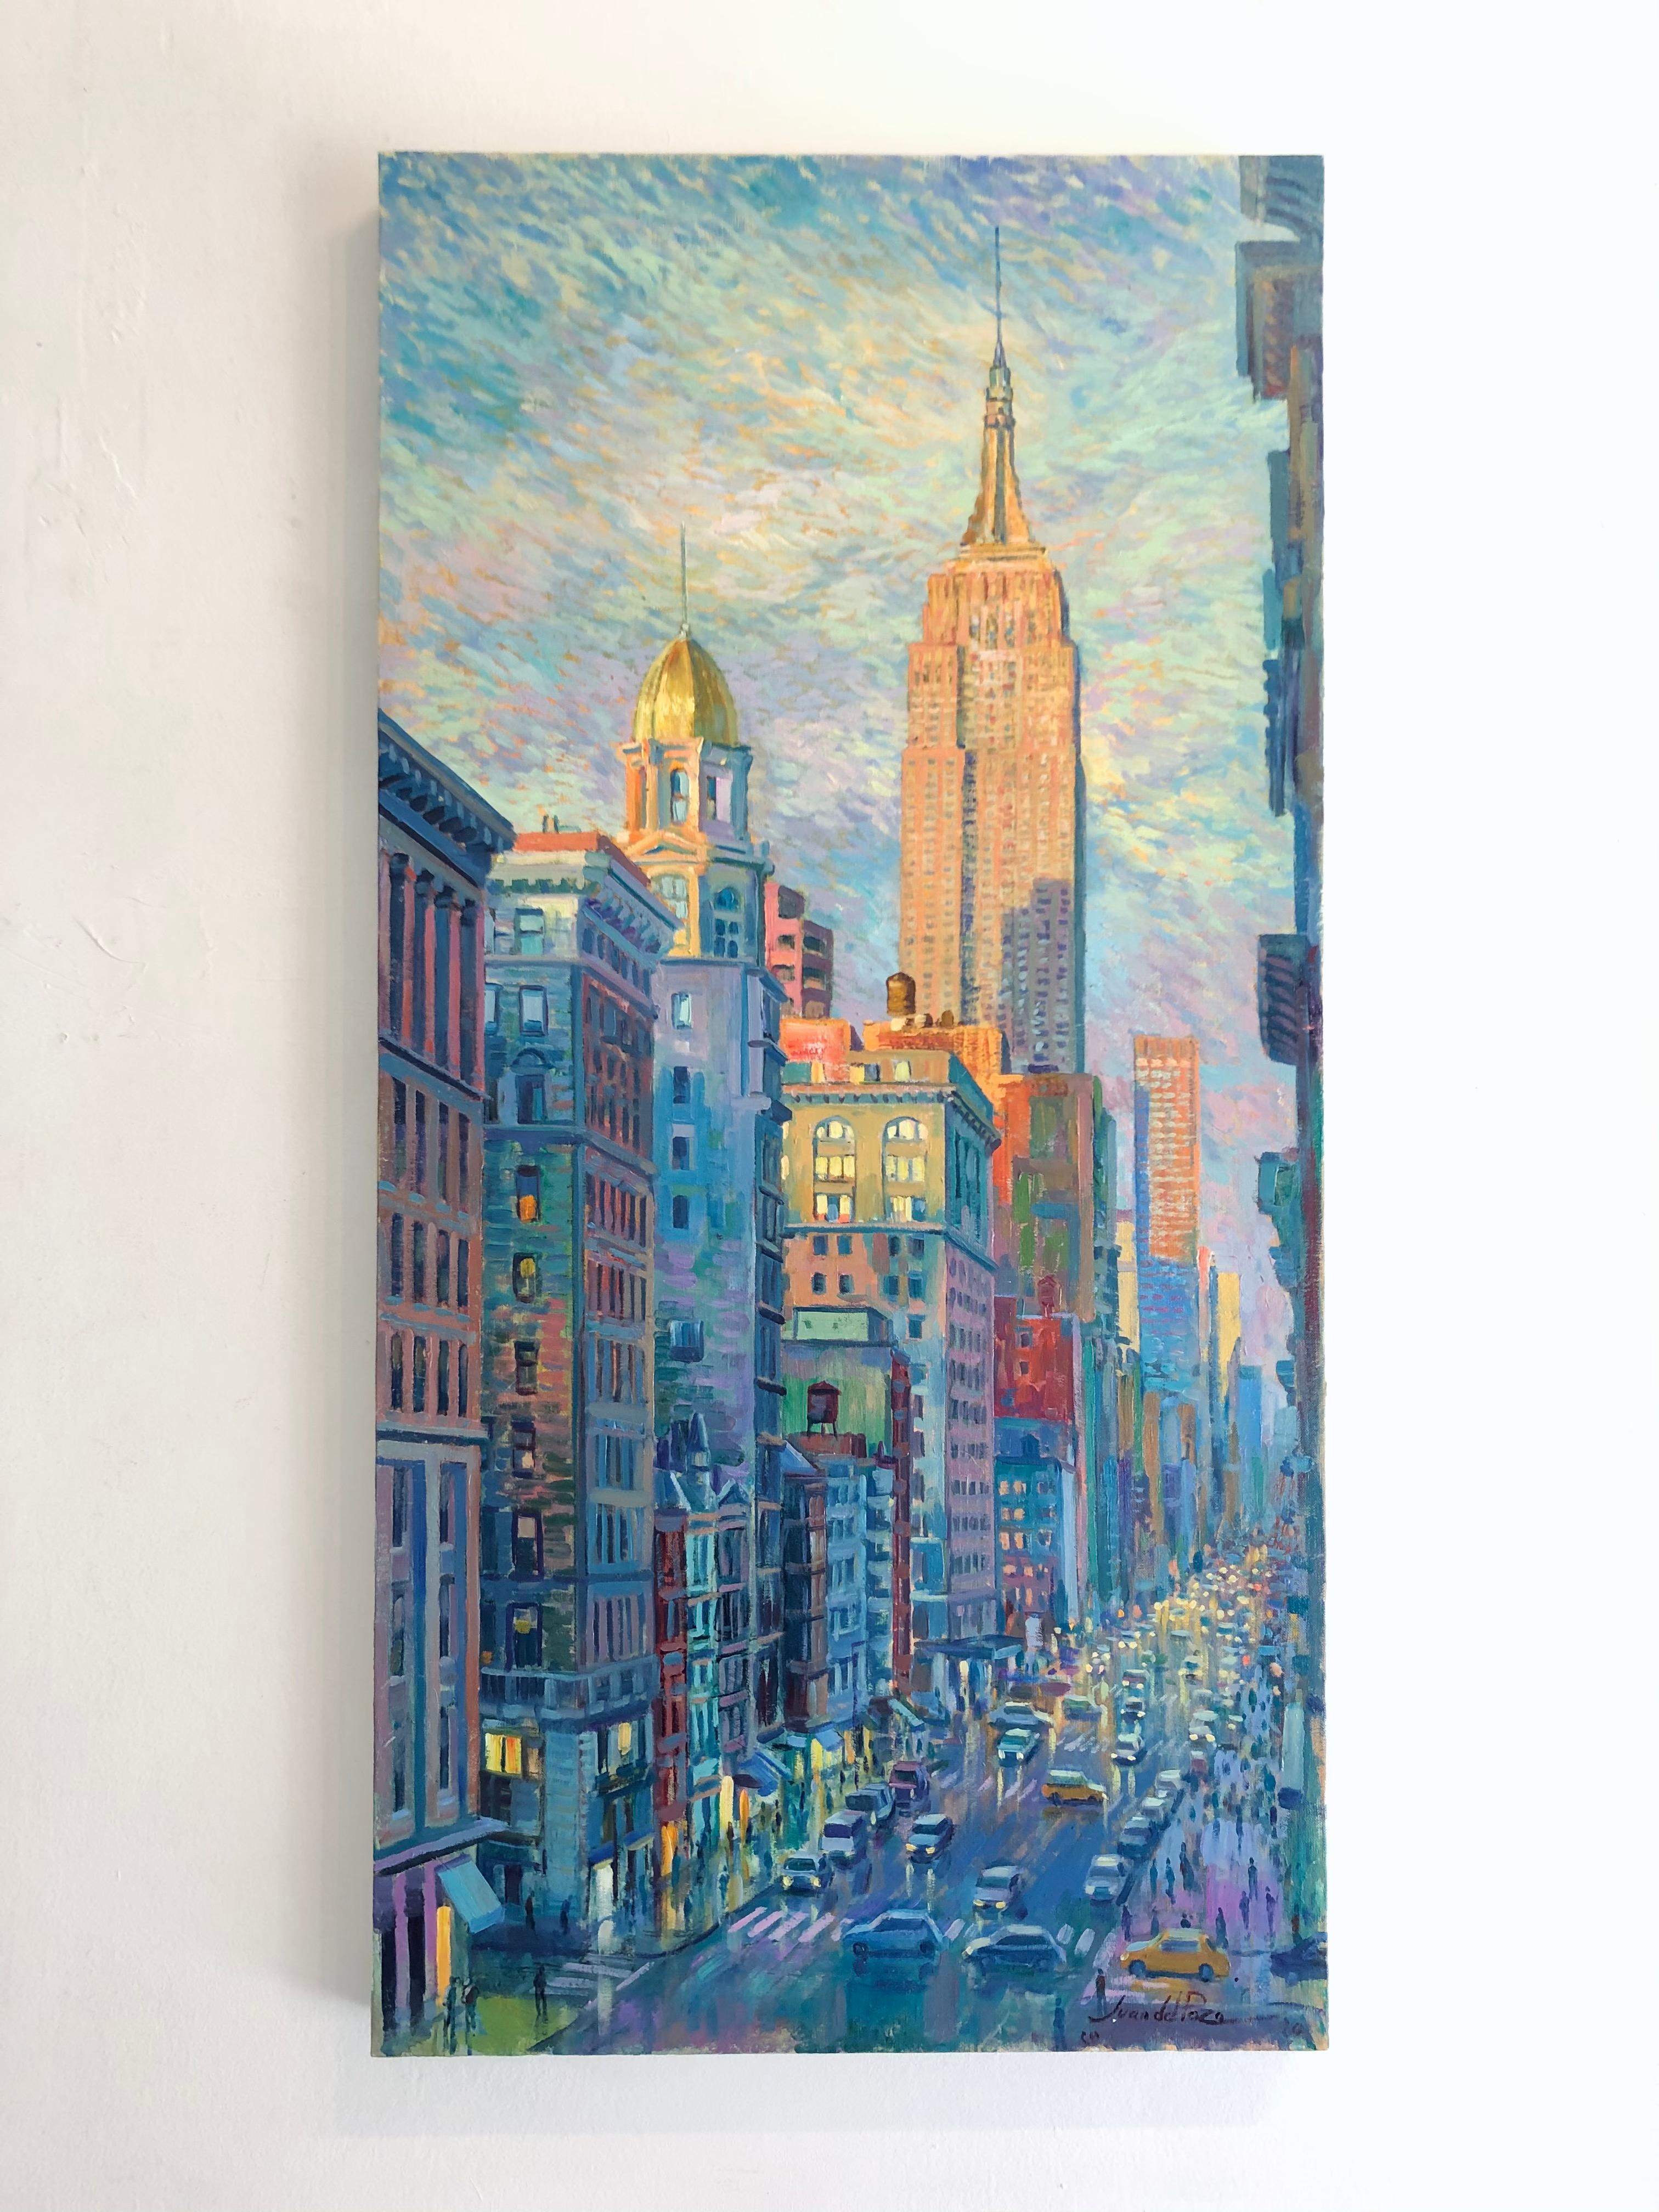 Empire State Street-original impressionism cityscape oil painting-modern Art - Painting by Juan del Pozo